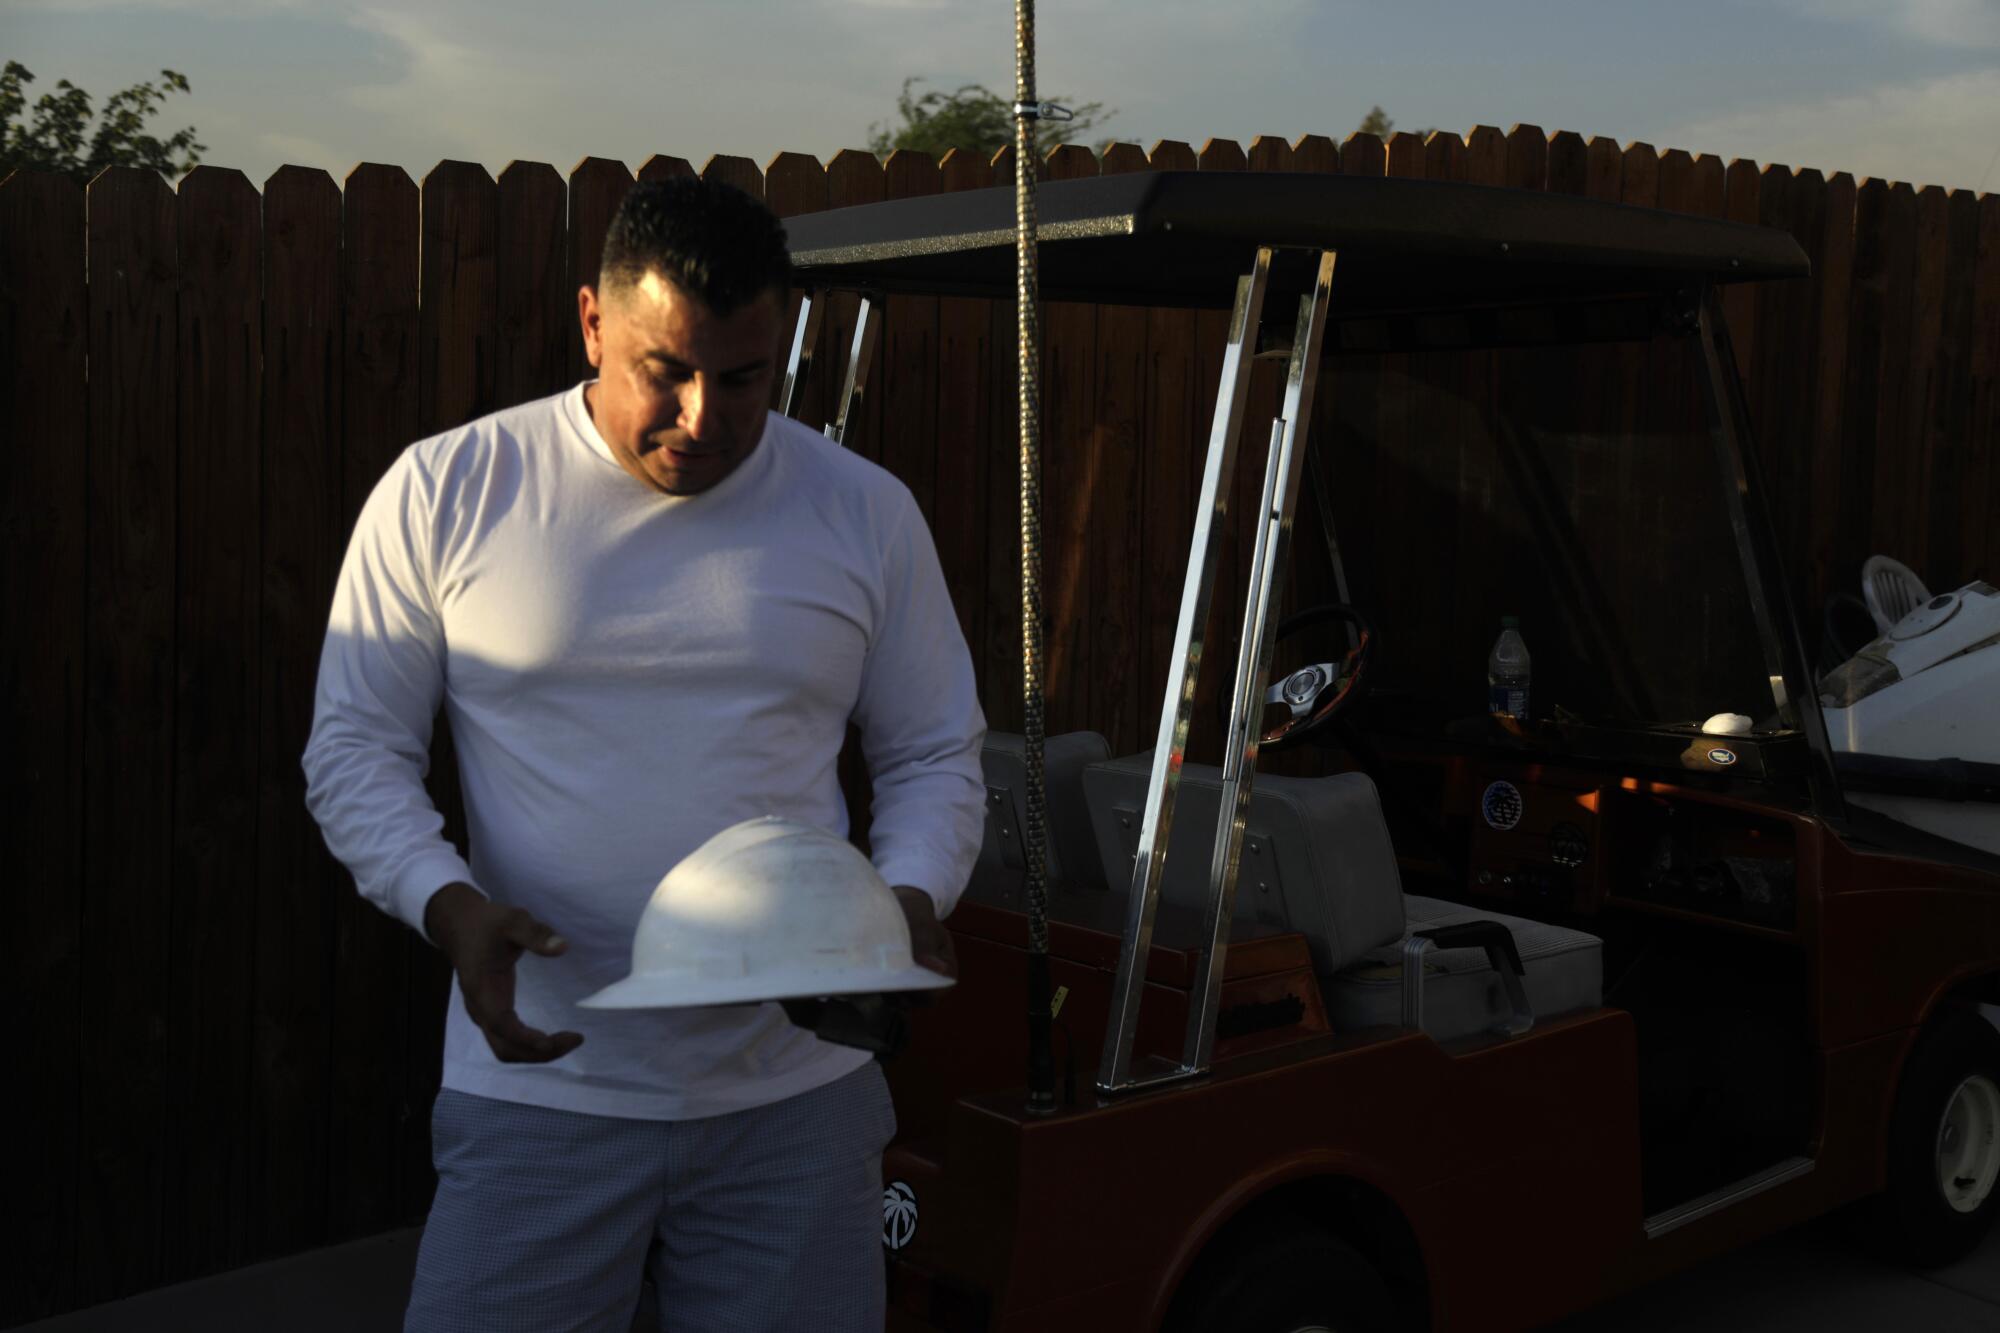  Jorge Valerio, 44, looks at the hardhat that belonged to his father, who died last summer from heat stroke.